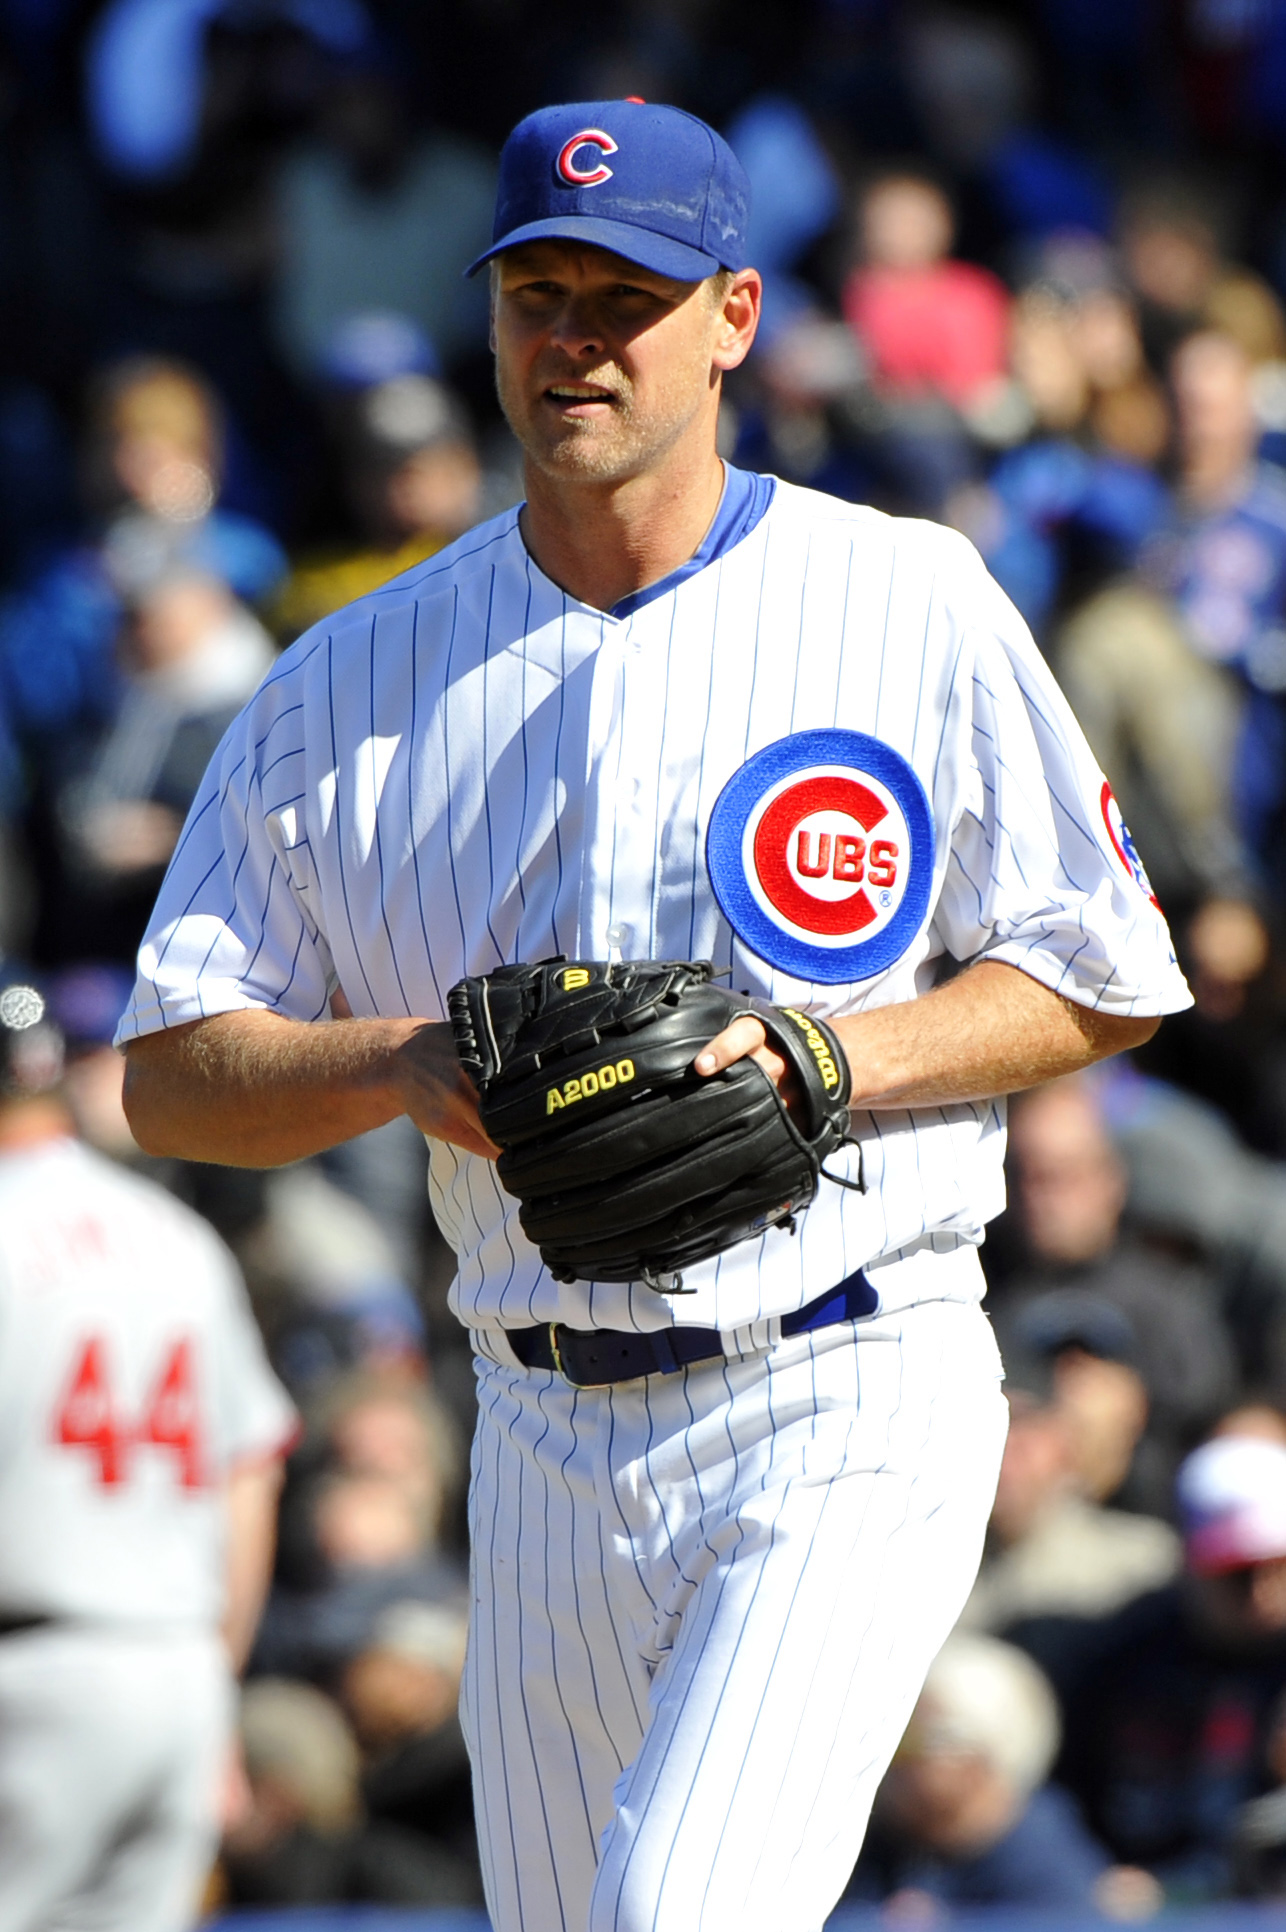 Former Cub Kerry Wood now a Yankee